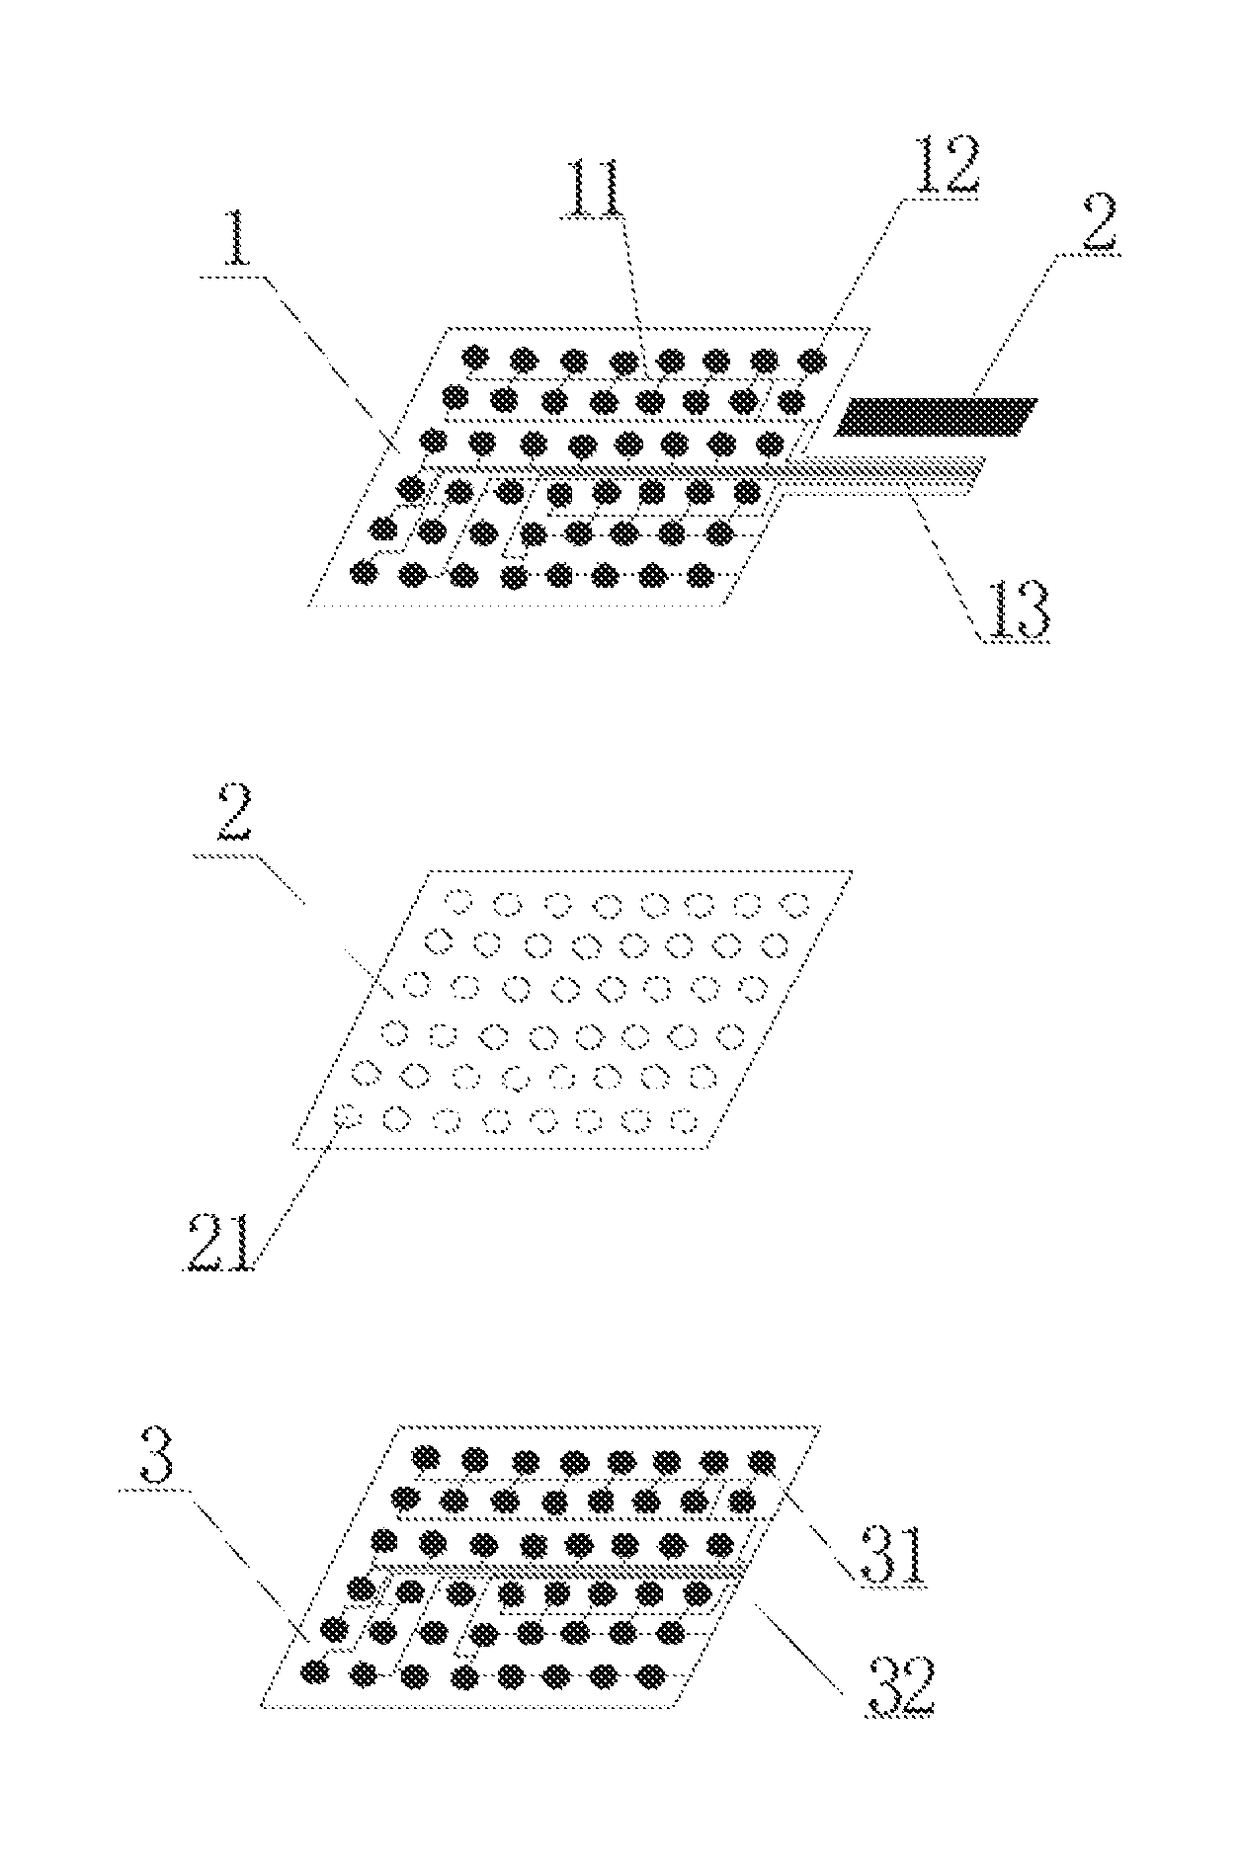 Membrane switch and method of manufacturing the same